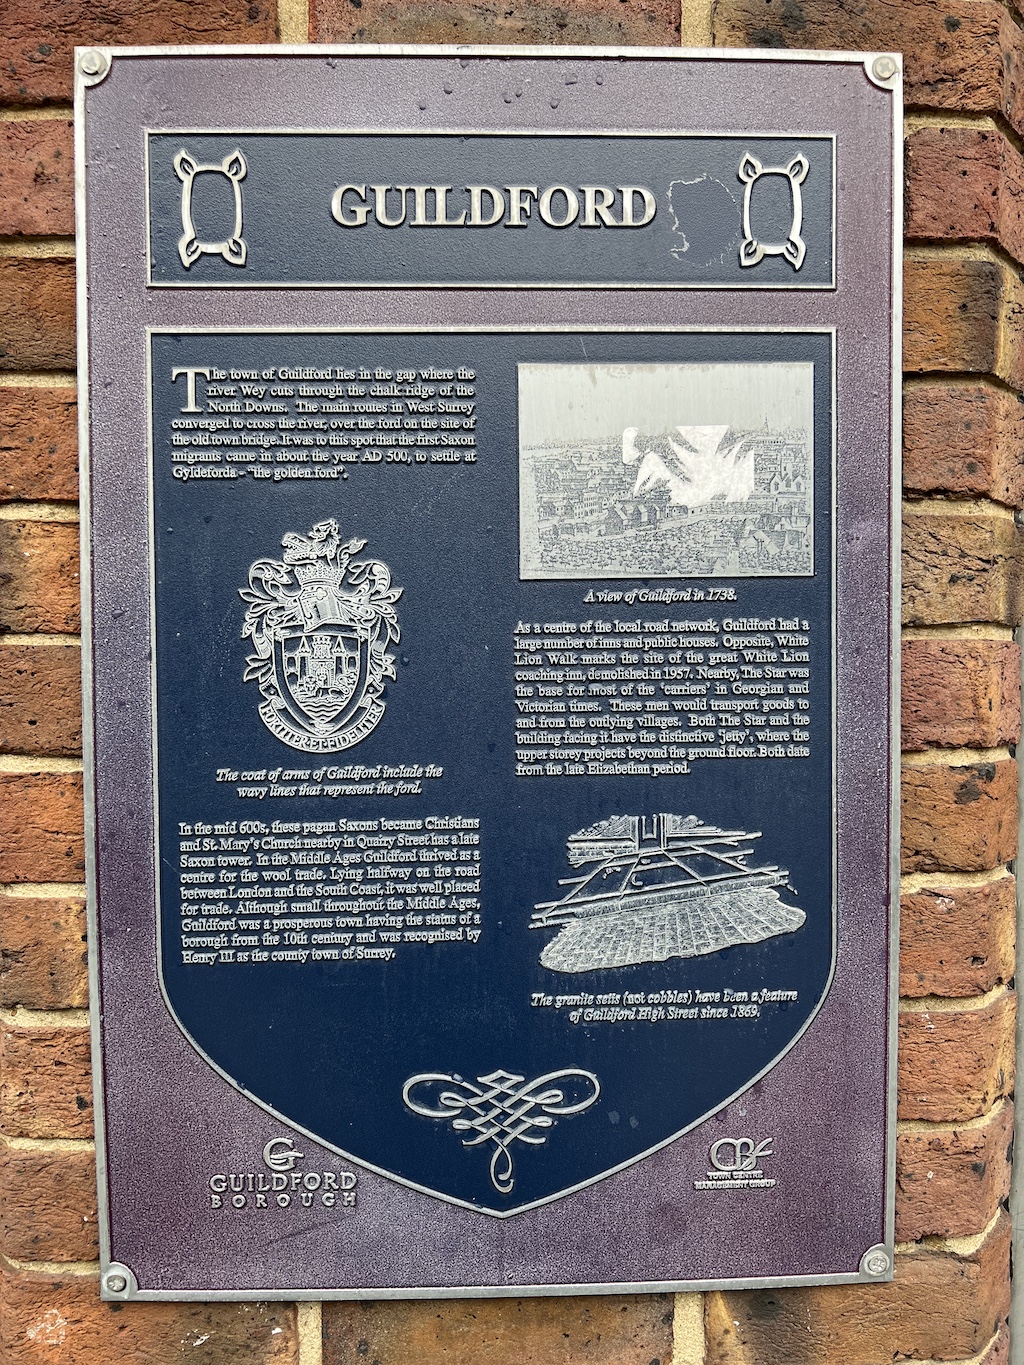 Blue plaque in Guildford for Guildford